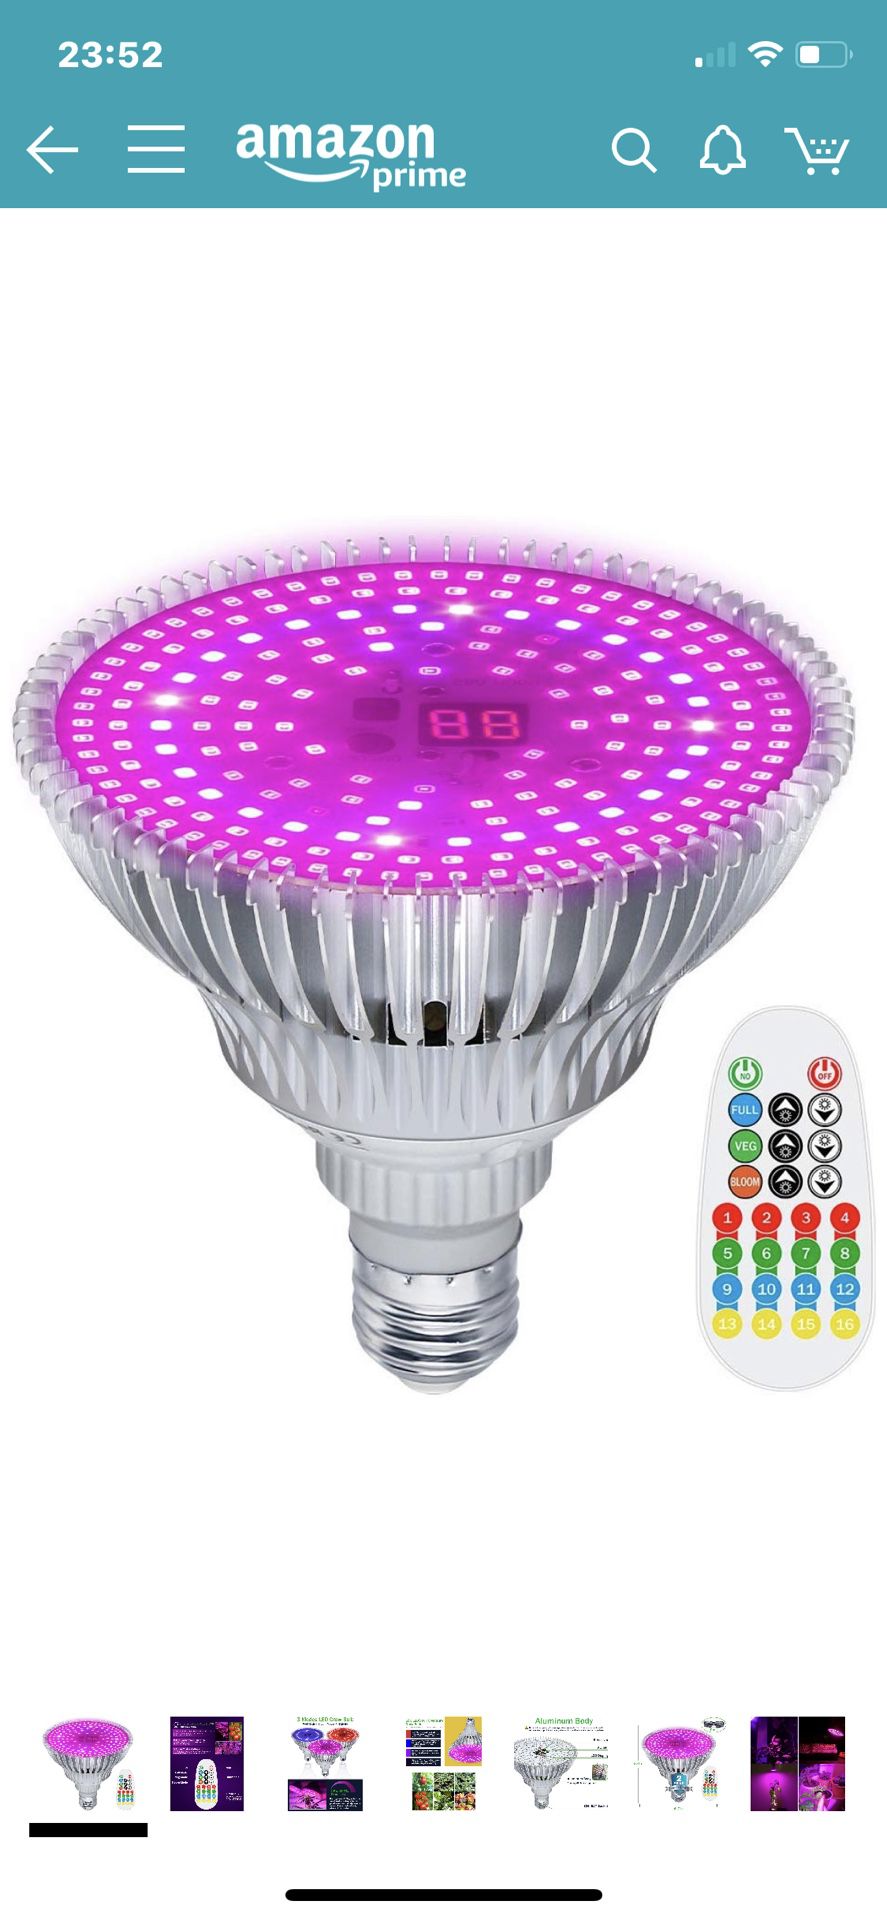 MZVUL LED Grow Light Bulb Timing 100W Full Spectrum Plant Light Bulb Dimmable with 3 Modes Auto On/Off Grow Lights for Indoor Plants Garden Flowers V